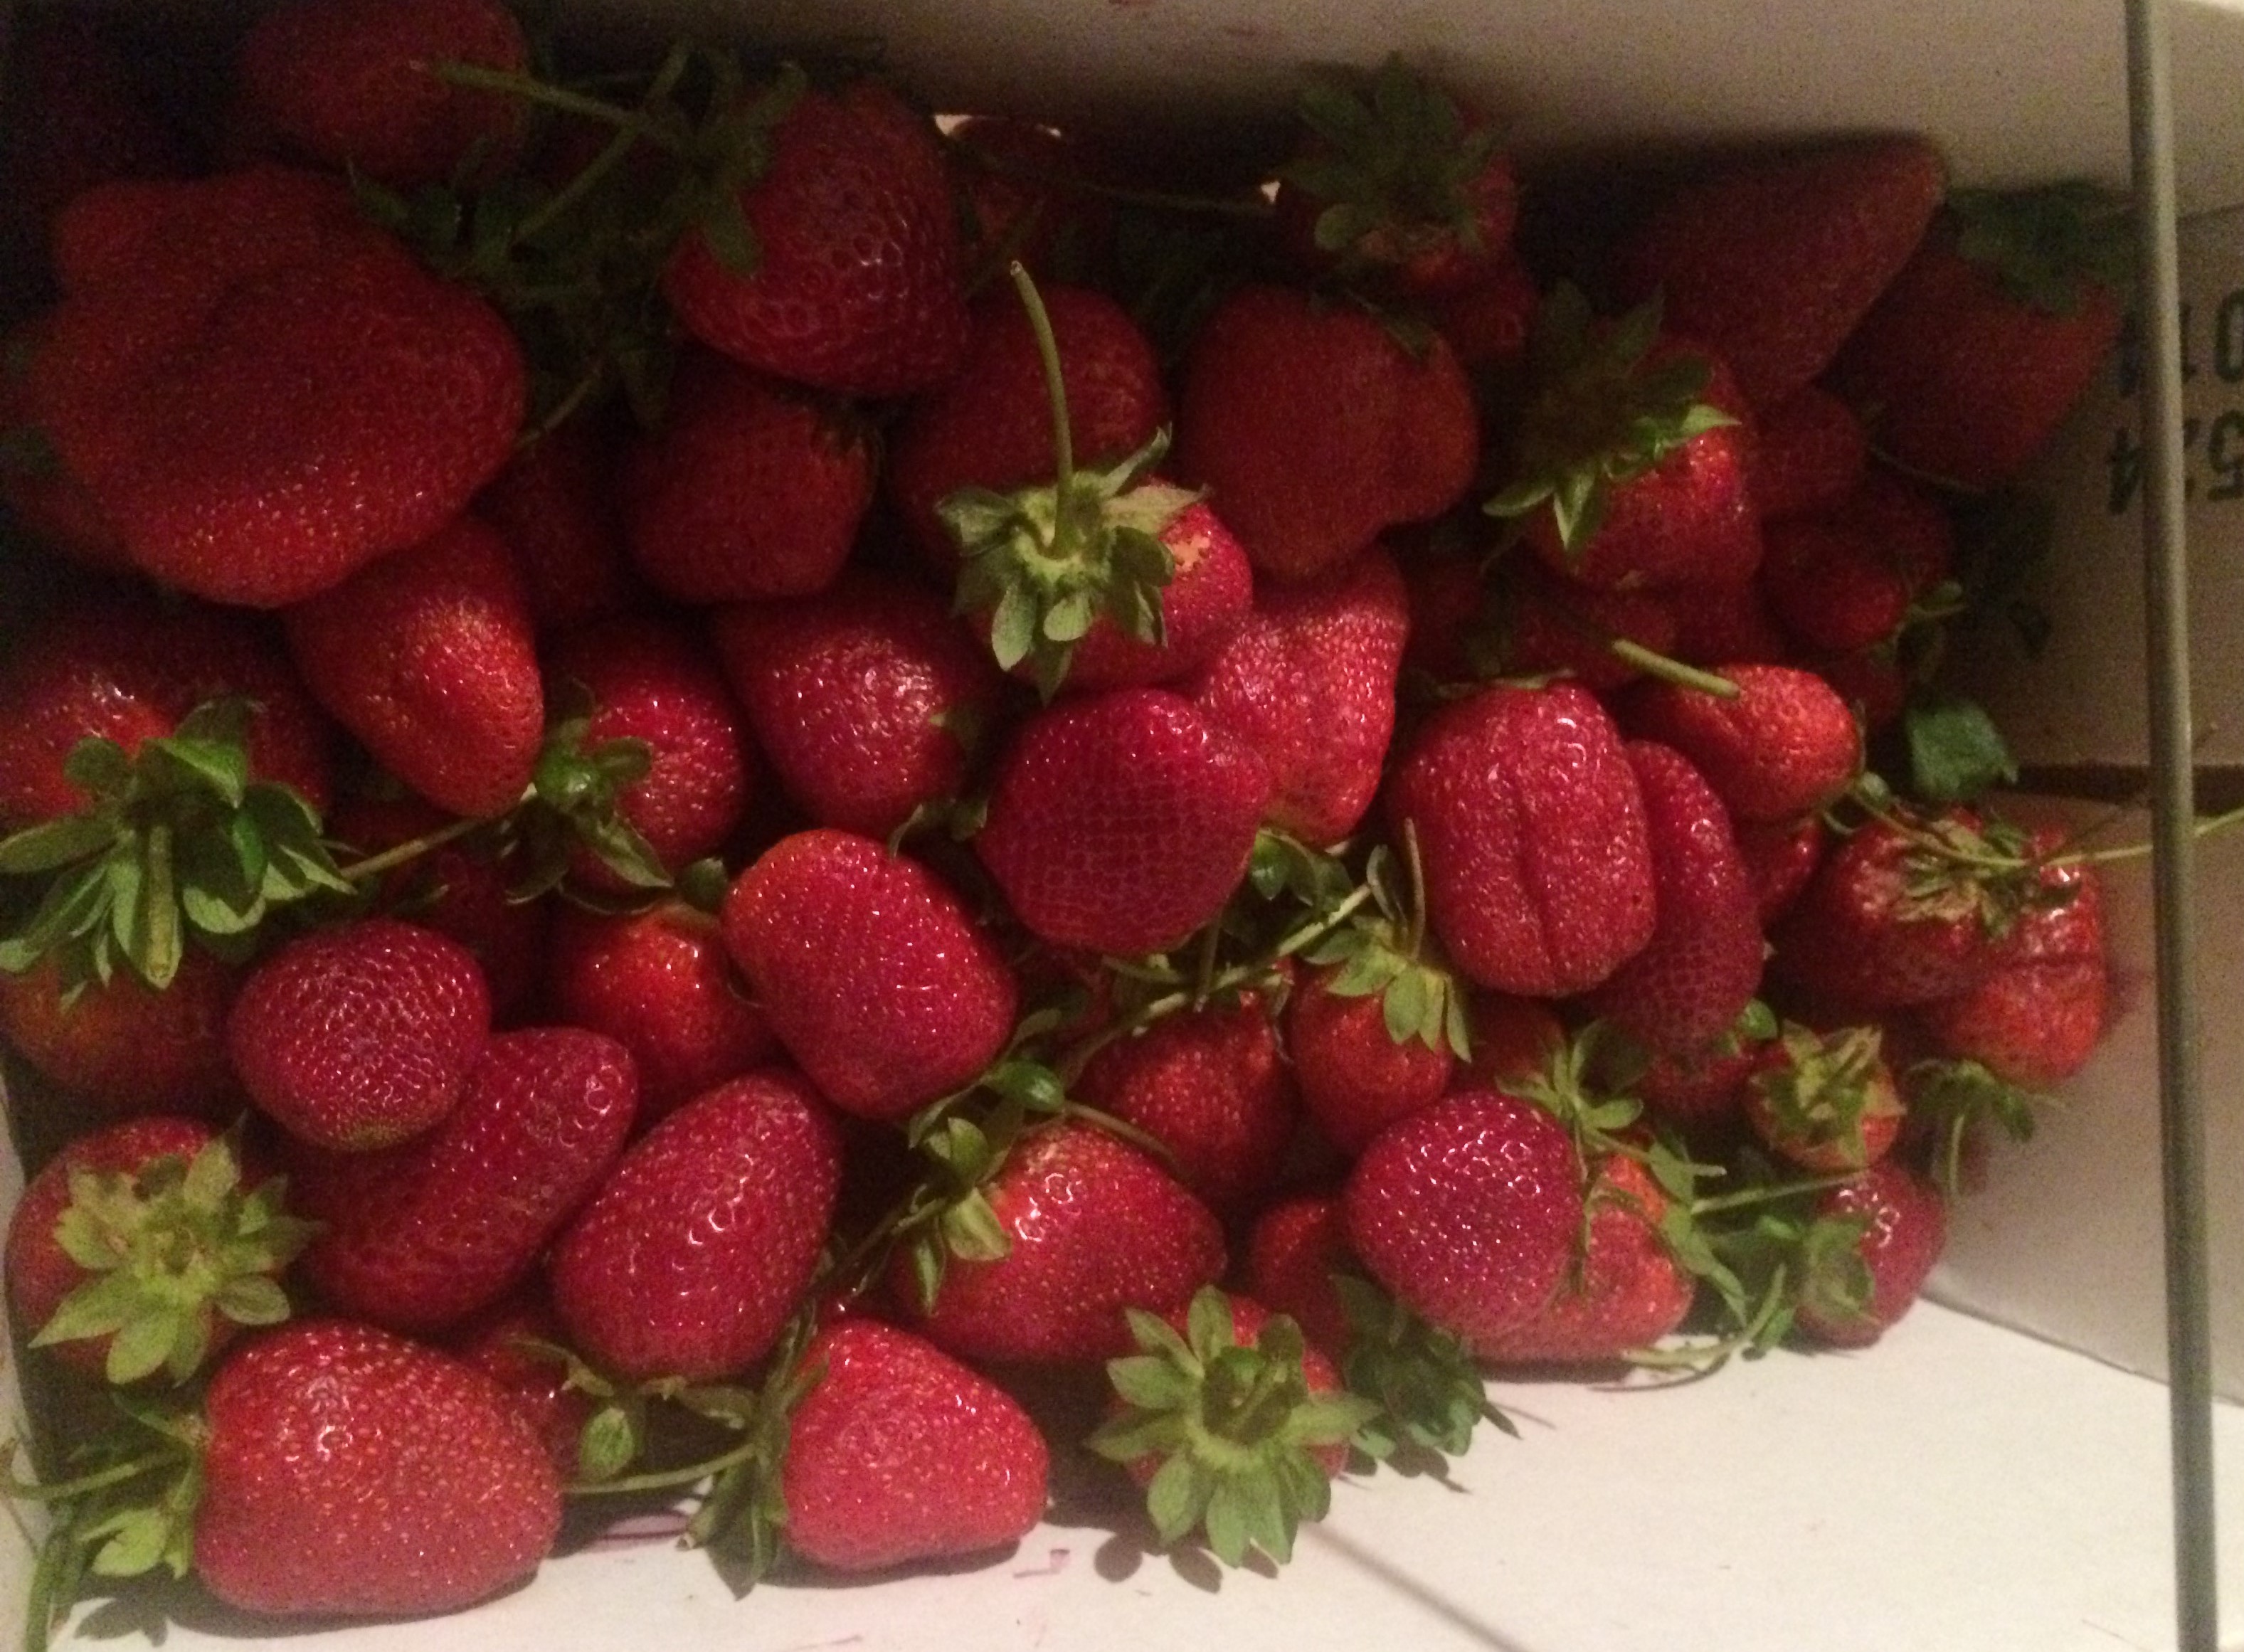 These are our strawberries.